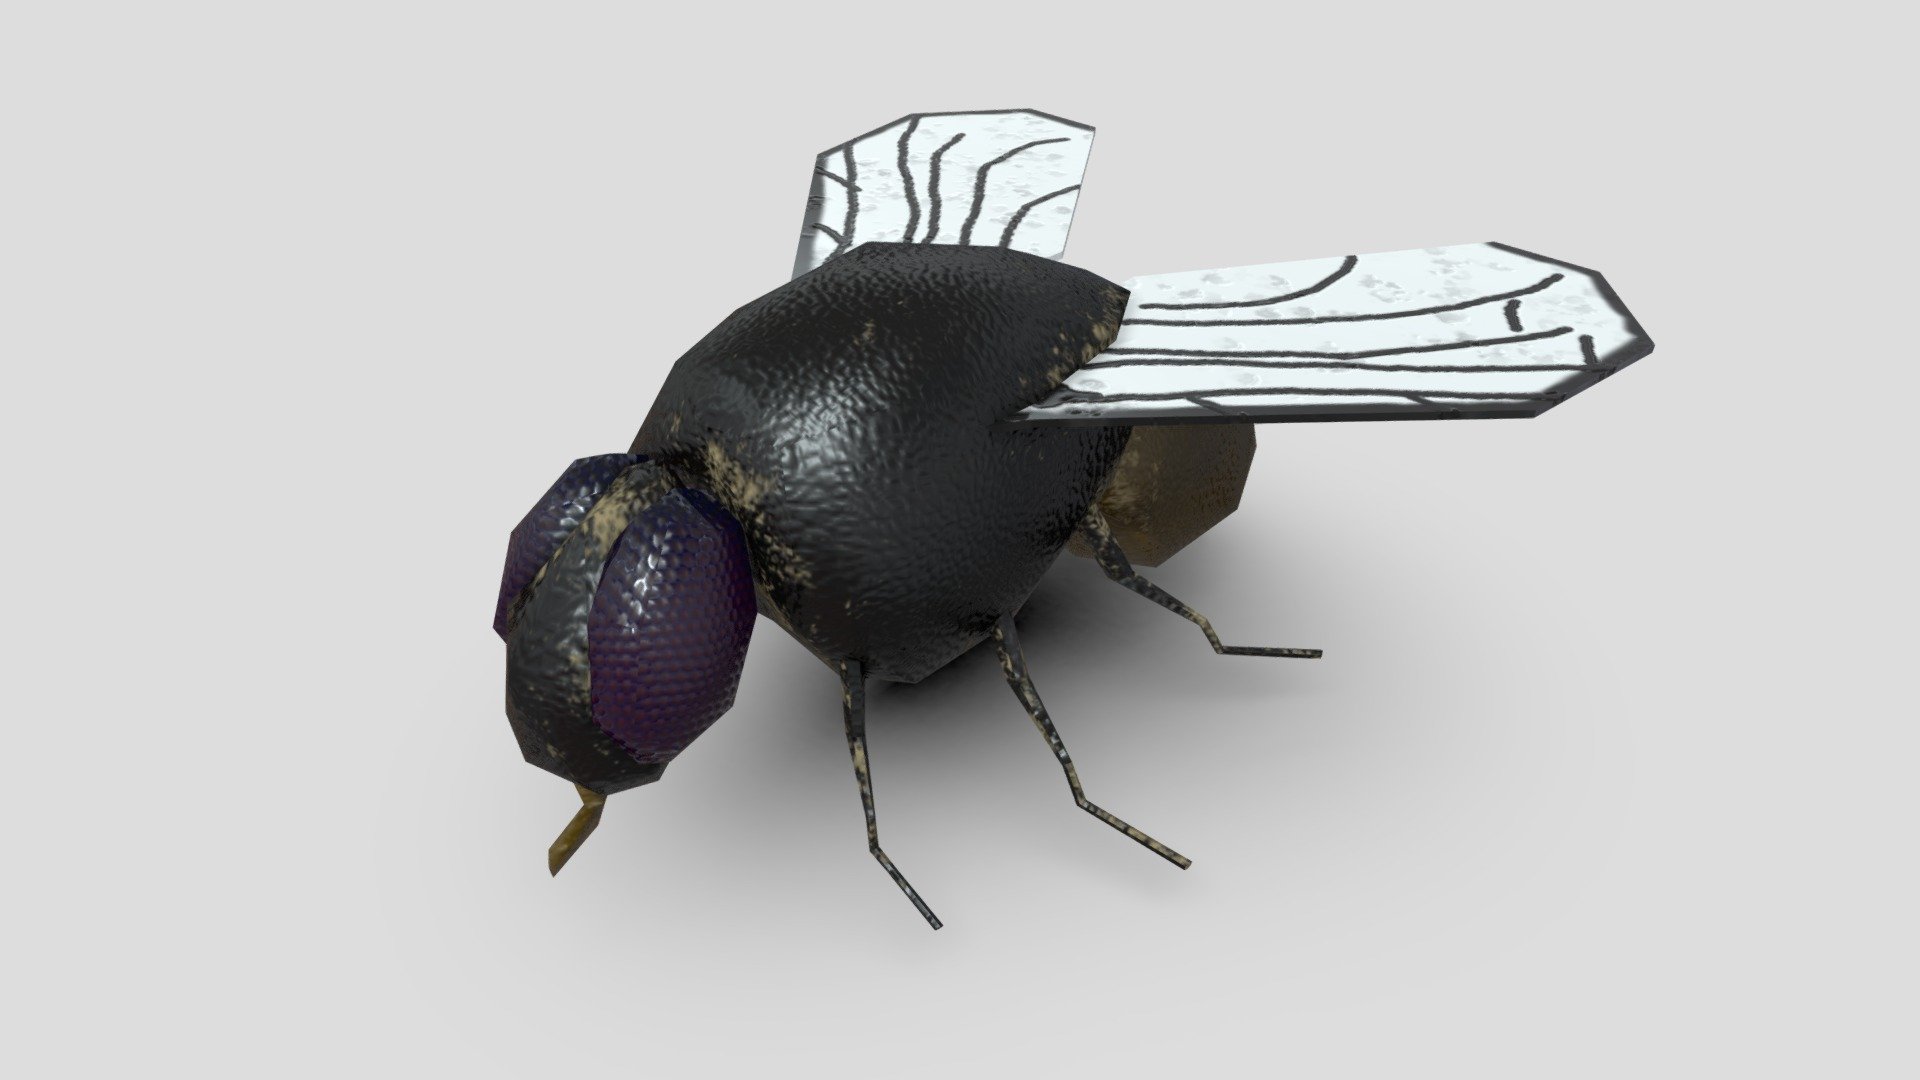 This is your standard, run-of-the-mill fly, classified as a Diptera. This is a low poly model&ndash;certainly not meant for close scrutiny. ;) If you look at my other Fly Paper model, you'll see a good use of such a low poly fly 3d model